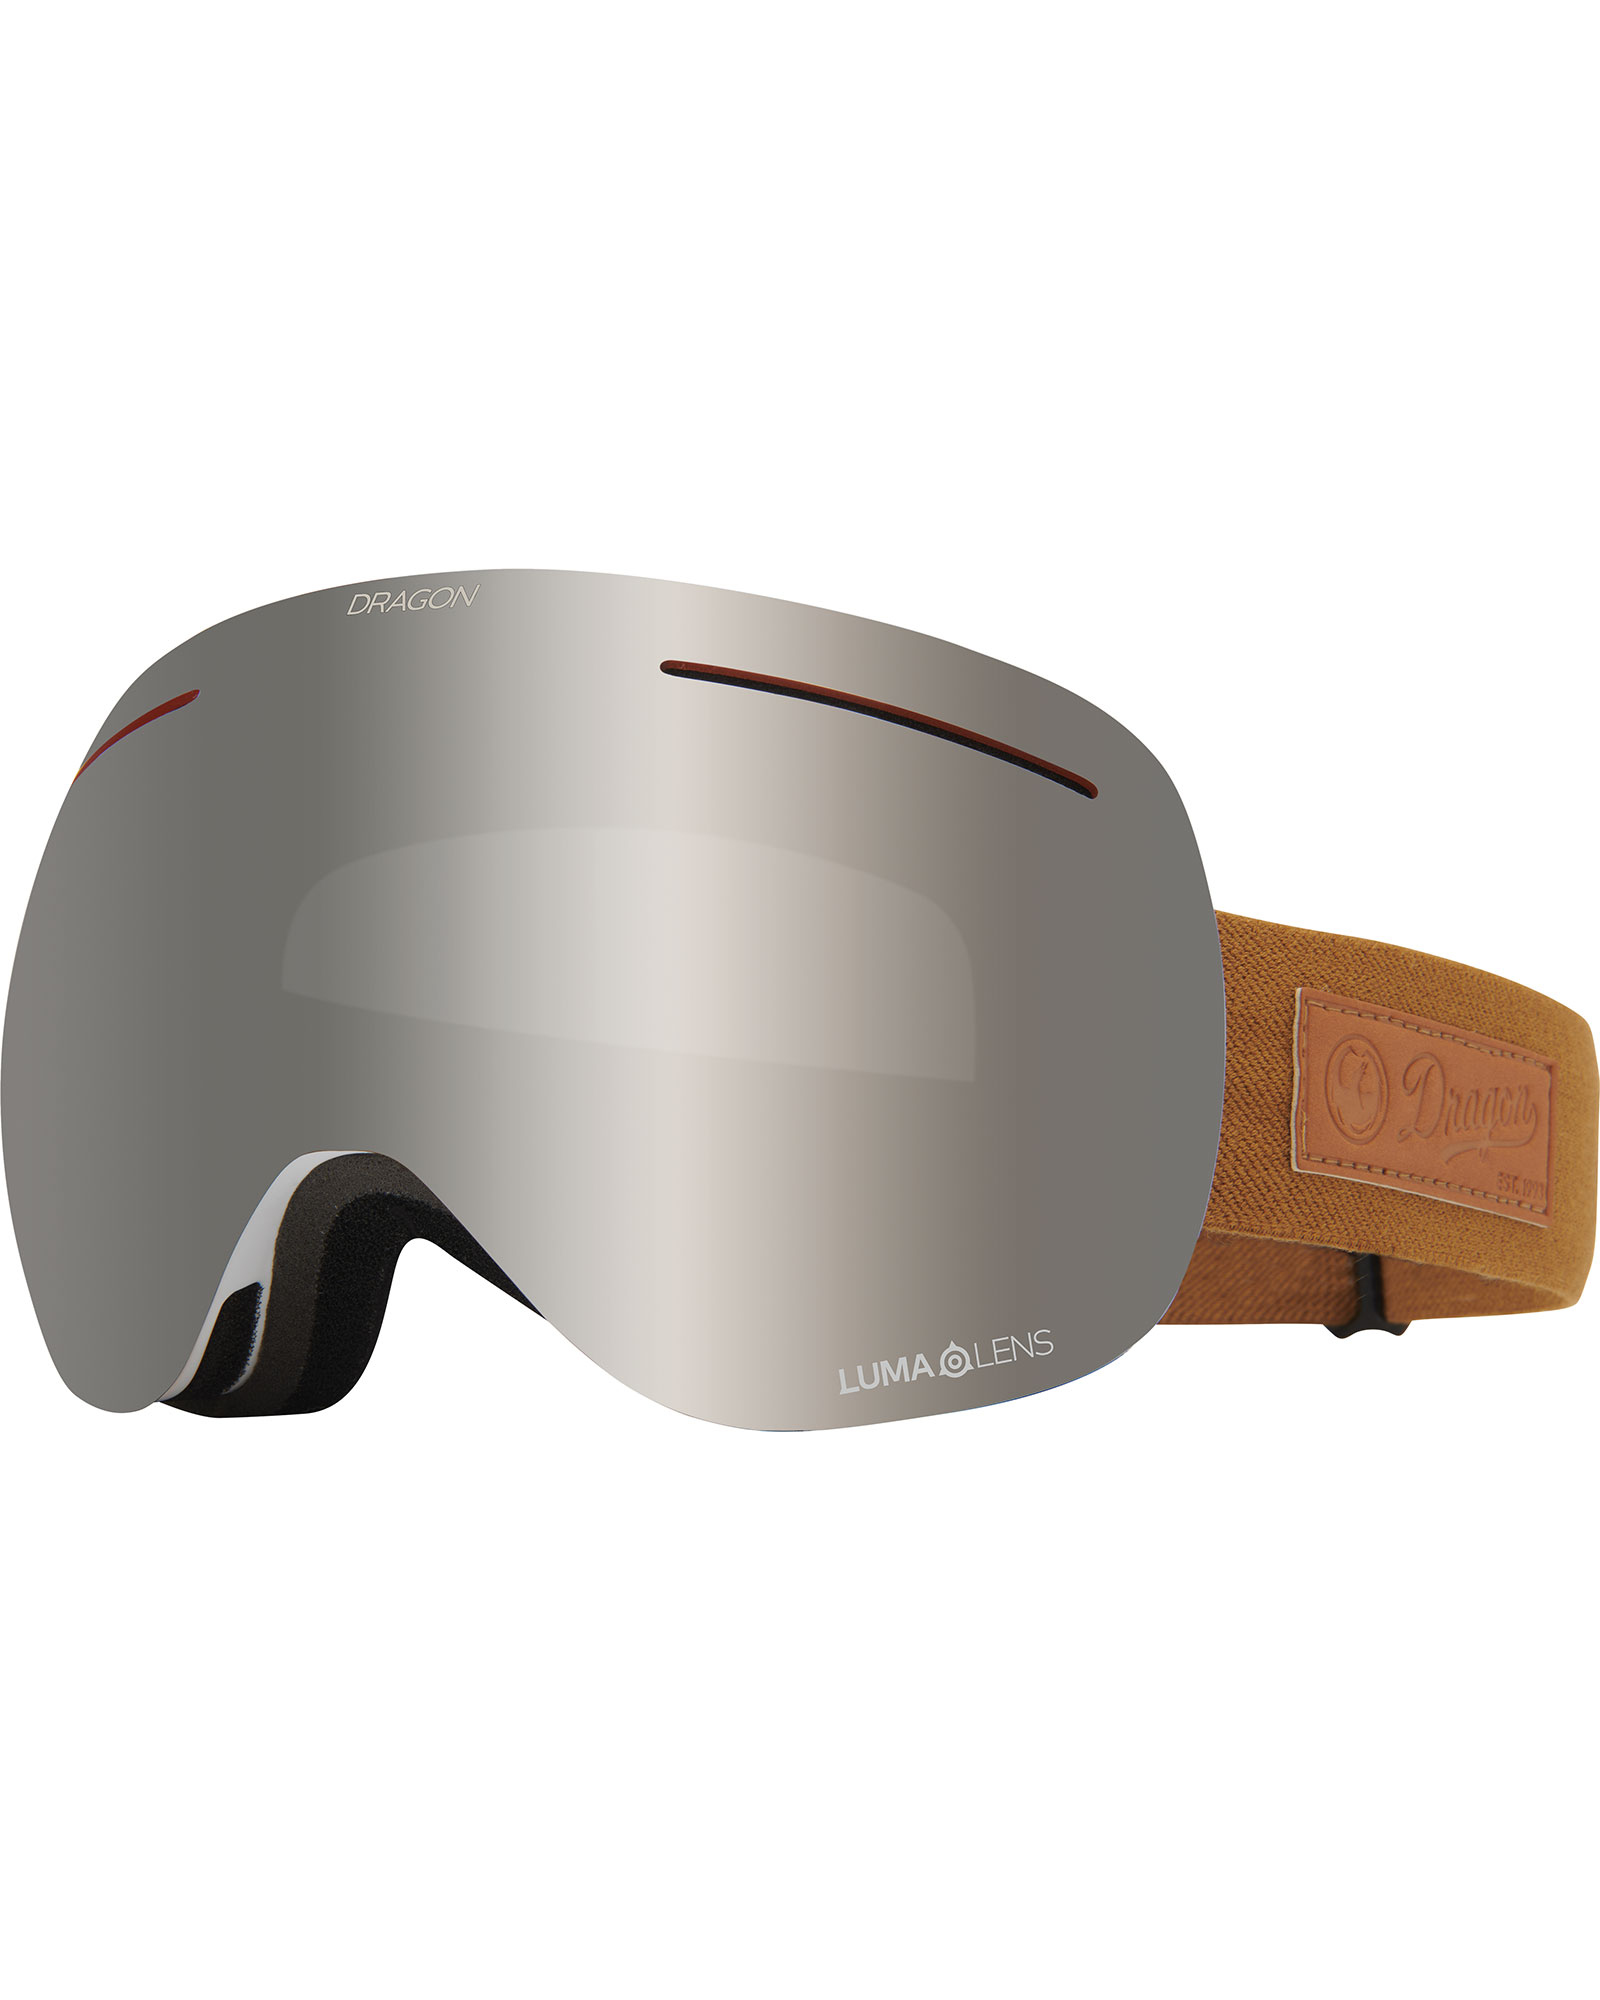 Dragon X1 Coyote lumalens Goggles Review - Snowboard Reviews